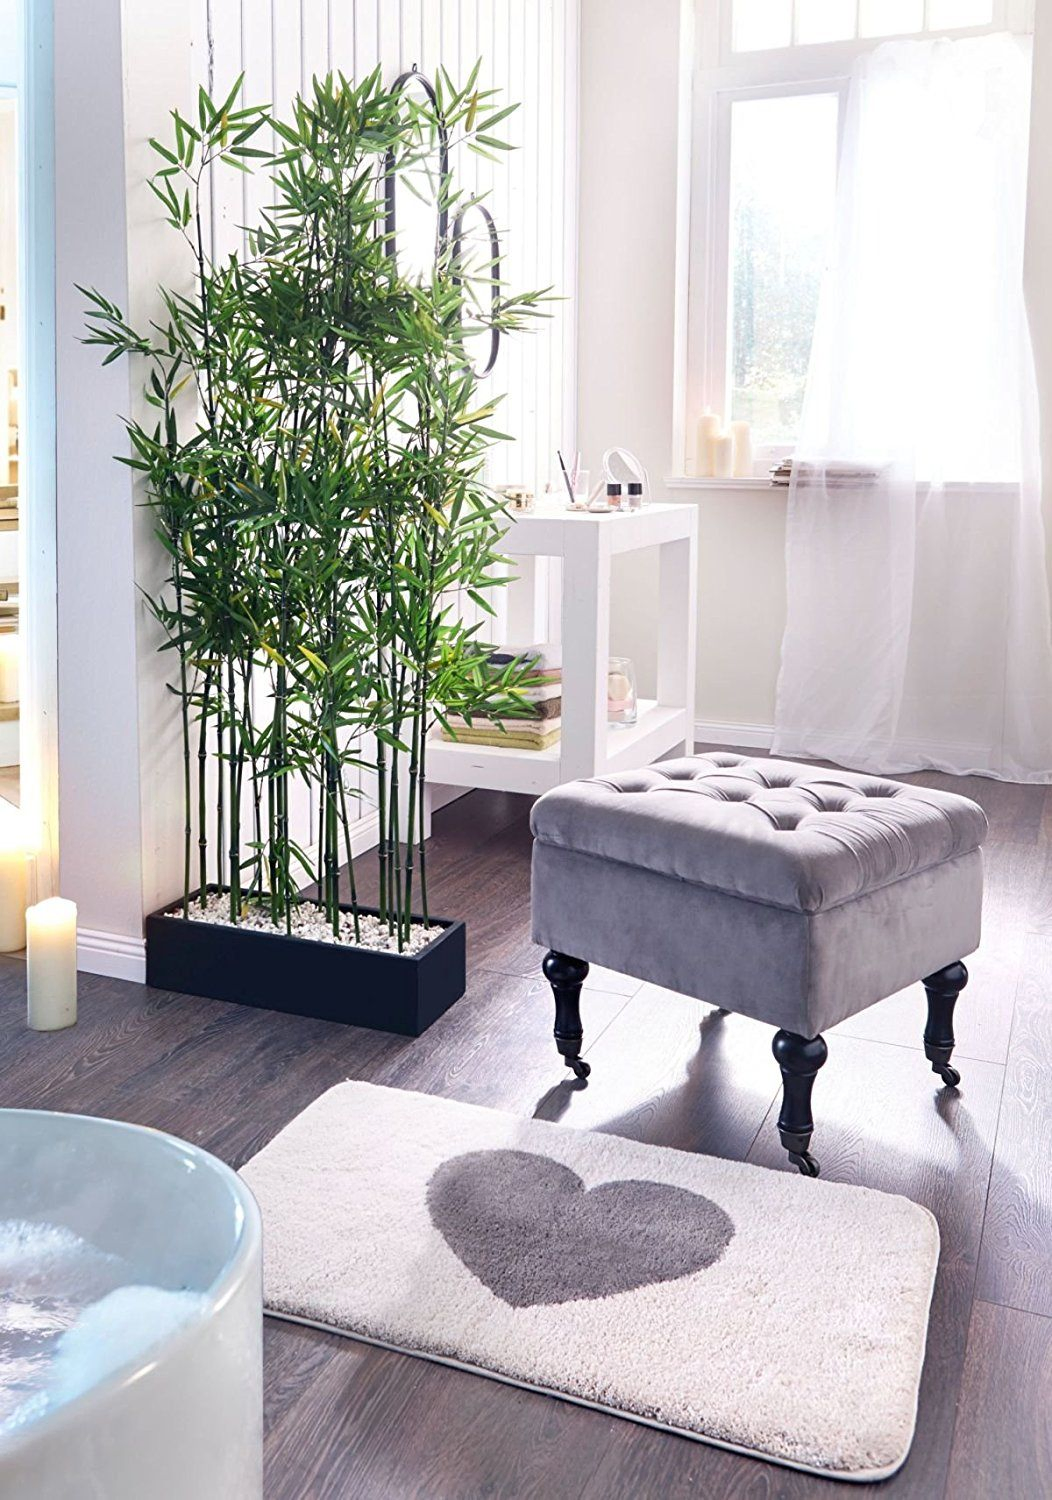 Bamboo Plant as part of Japanese Home design via Simphome